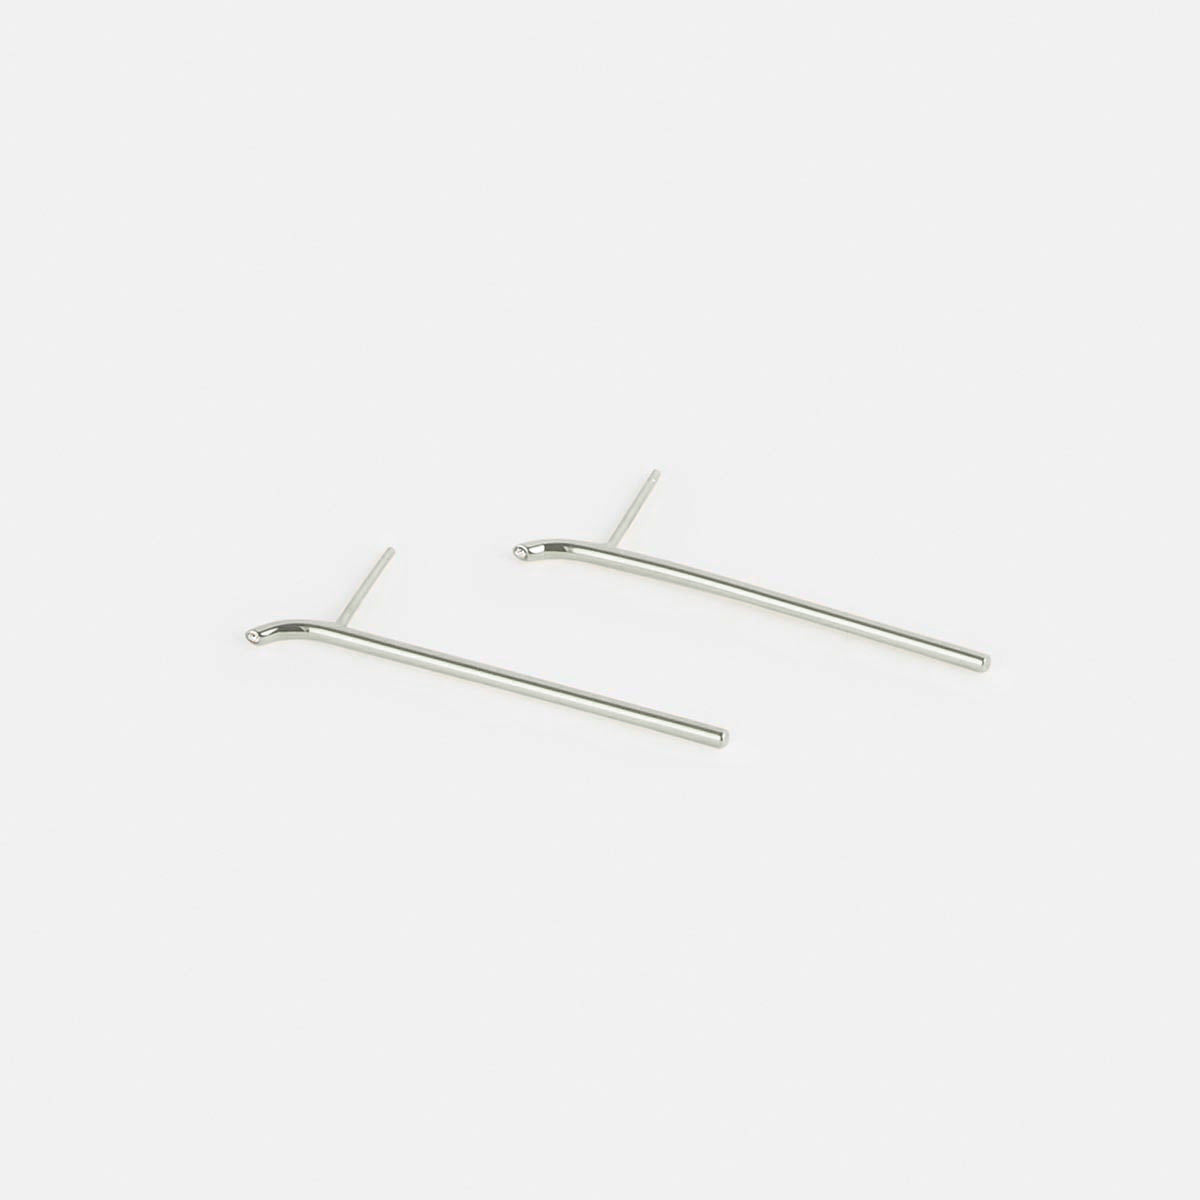  Lero Delicate Bar Earrings 14k White Gold set with White Diamonds By SHW Fine Jewelry NYC